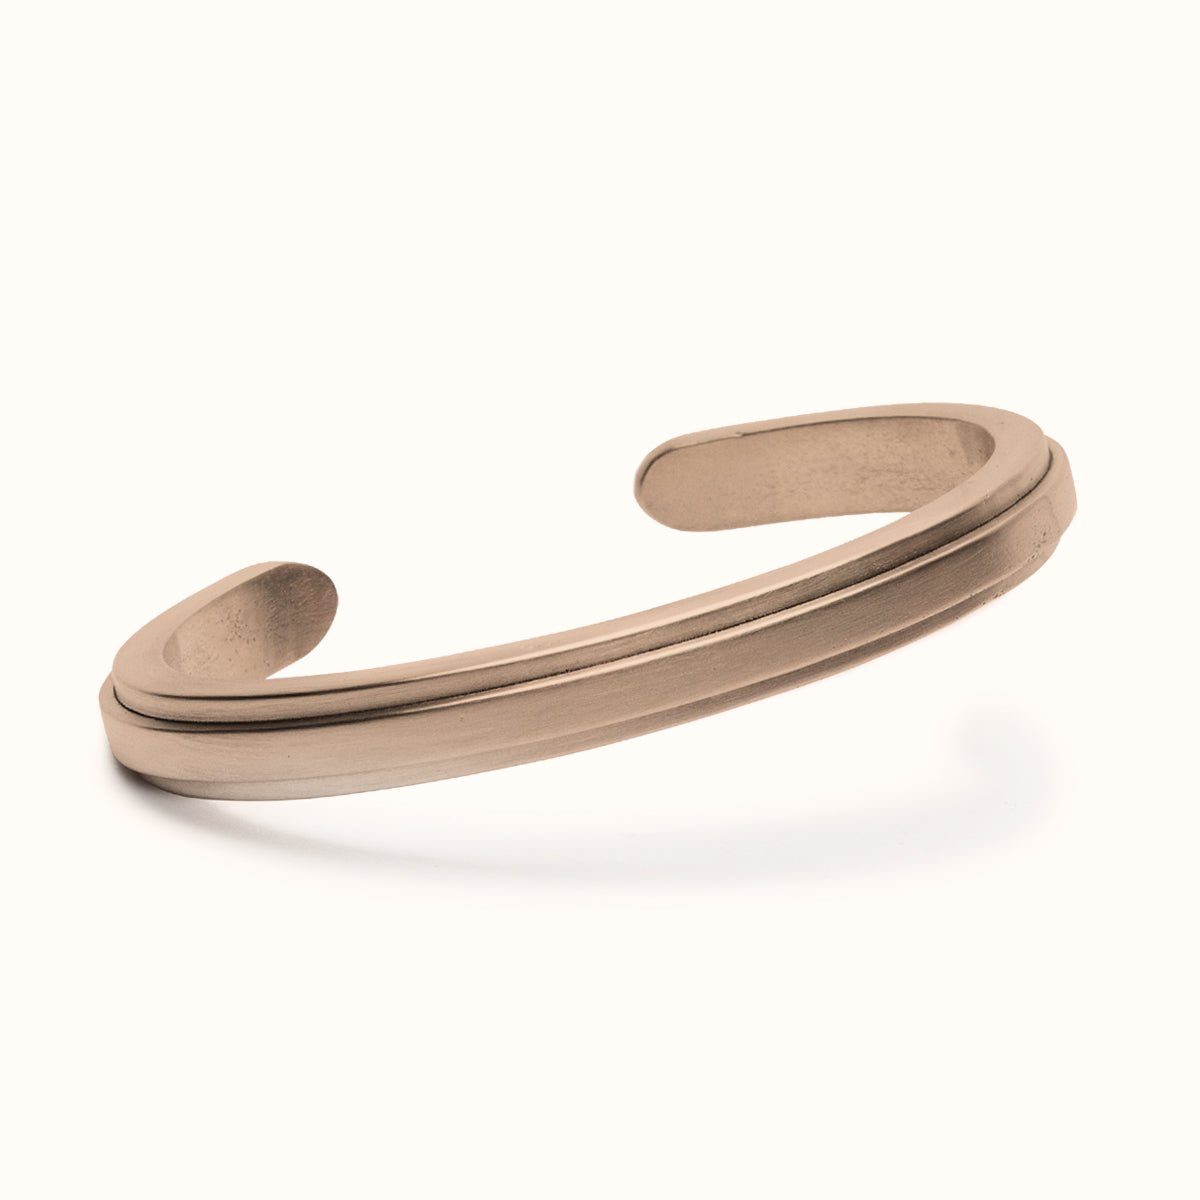 A squared off solid bronze cuff with an exterior band of bronze running down the center. The Amanca Cuff is designed and handcrafted in Portland, Oregon.